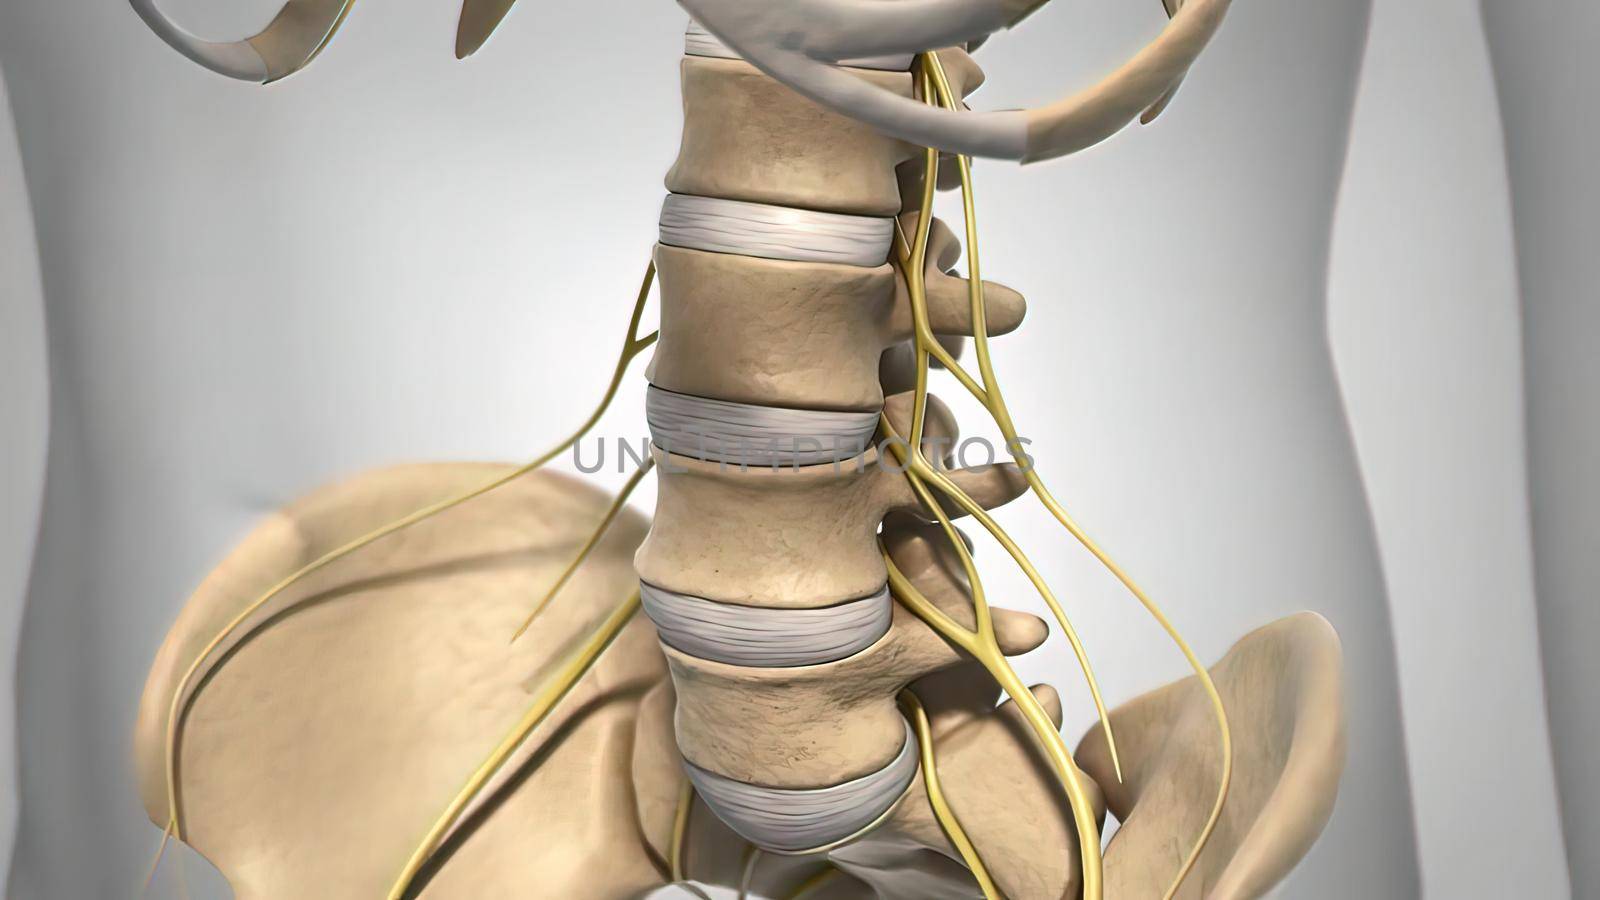 Spinal cord, disc and nervous system by creativepic